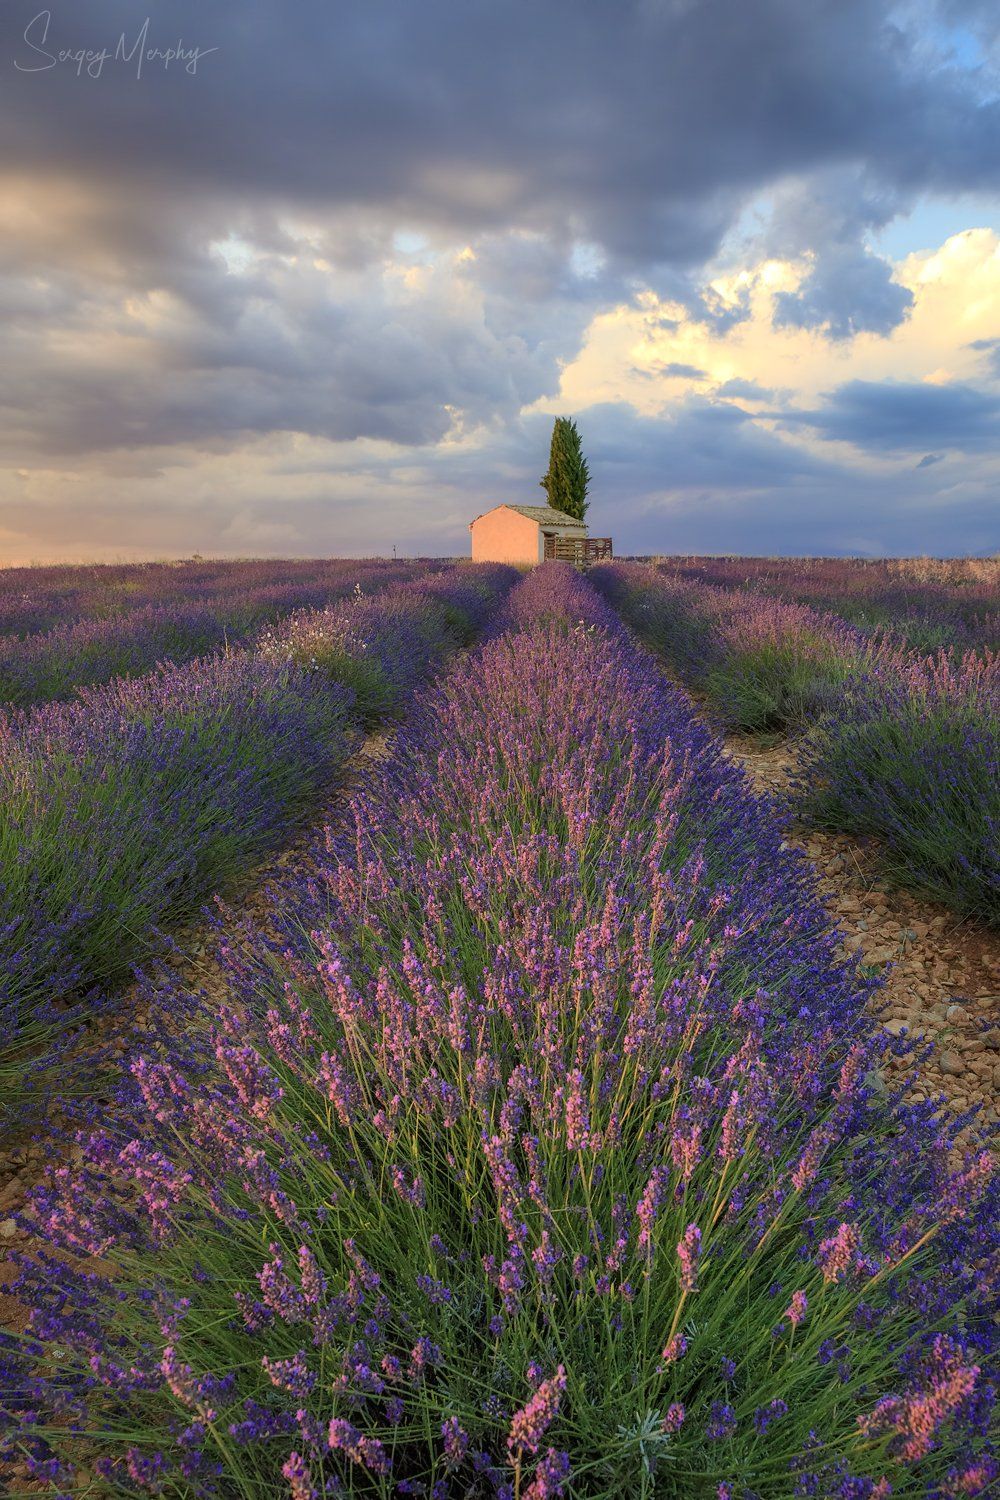 lavender fields small house provence, Sergey Merphy